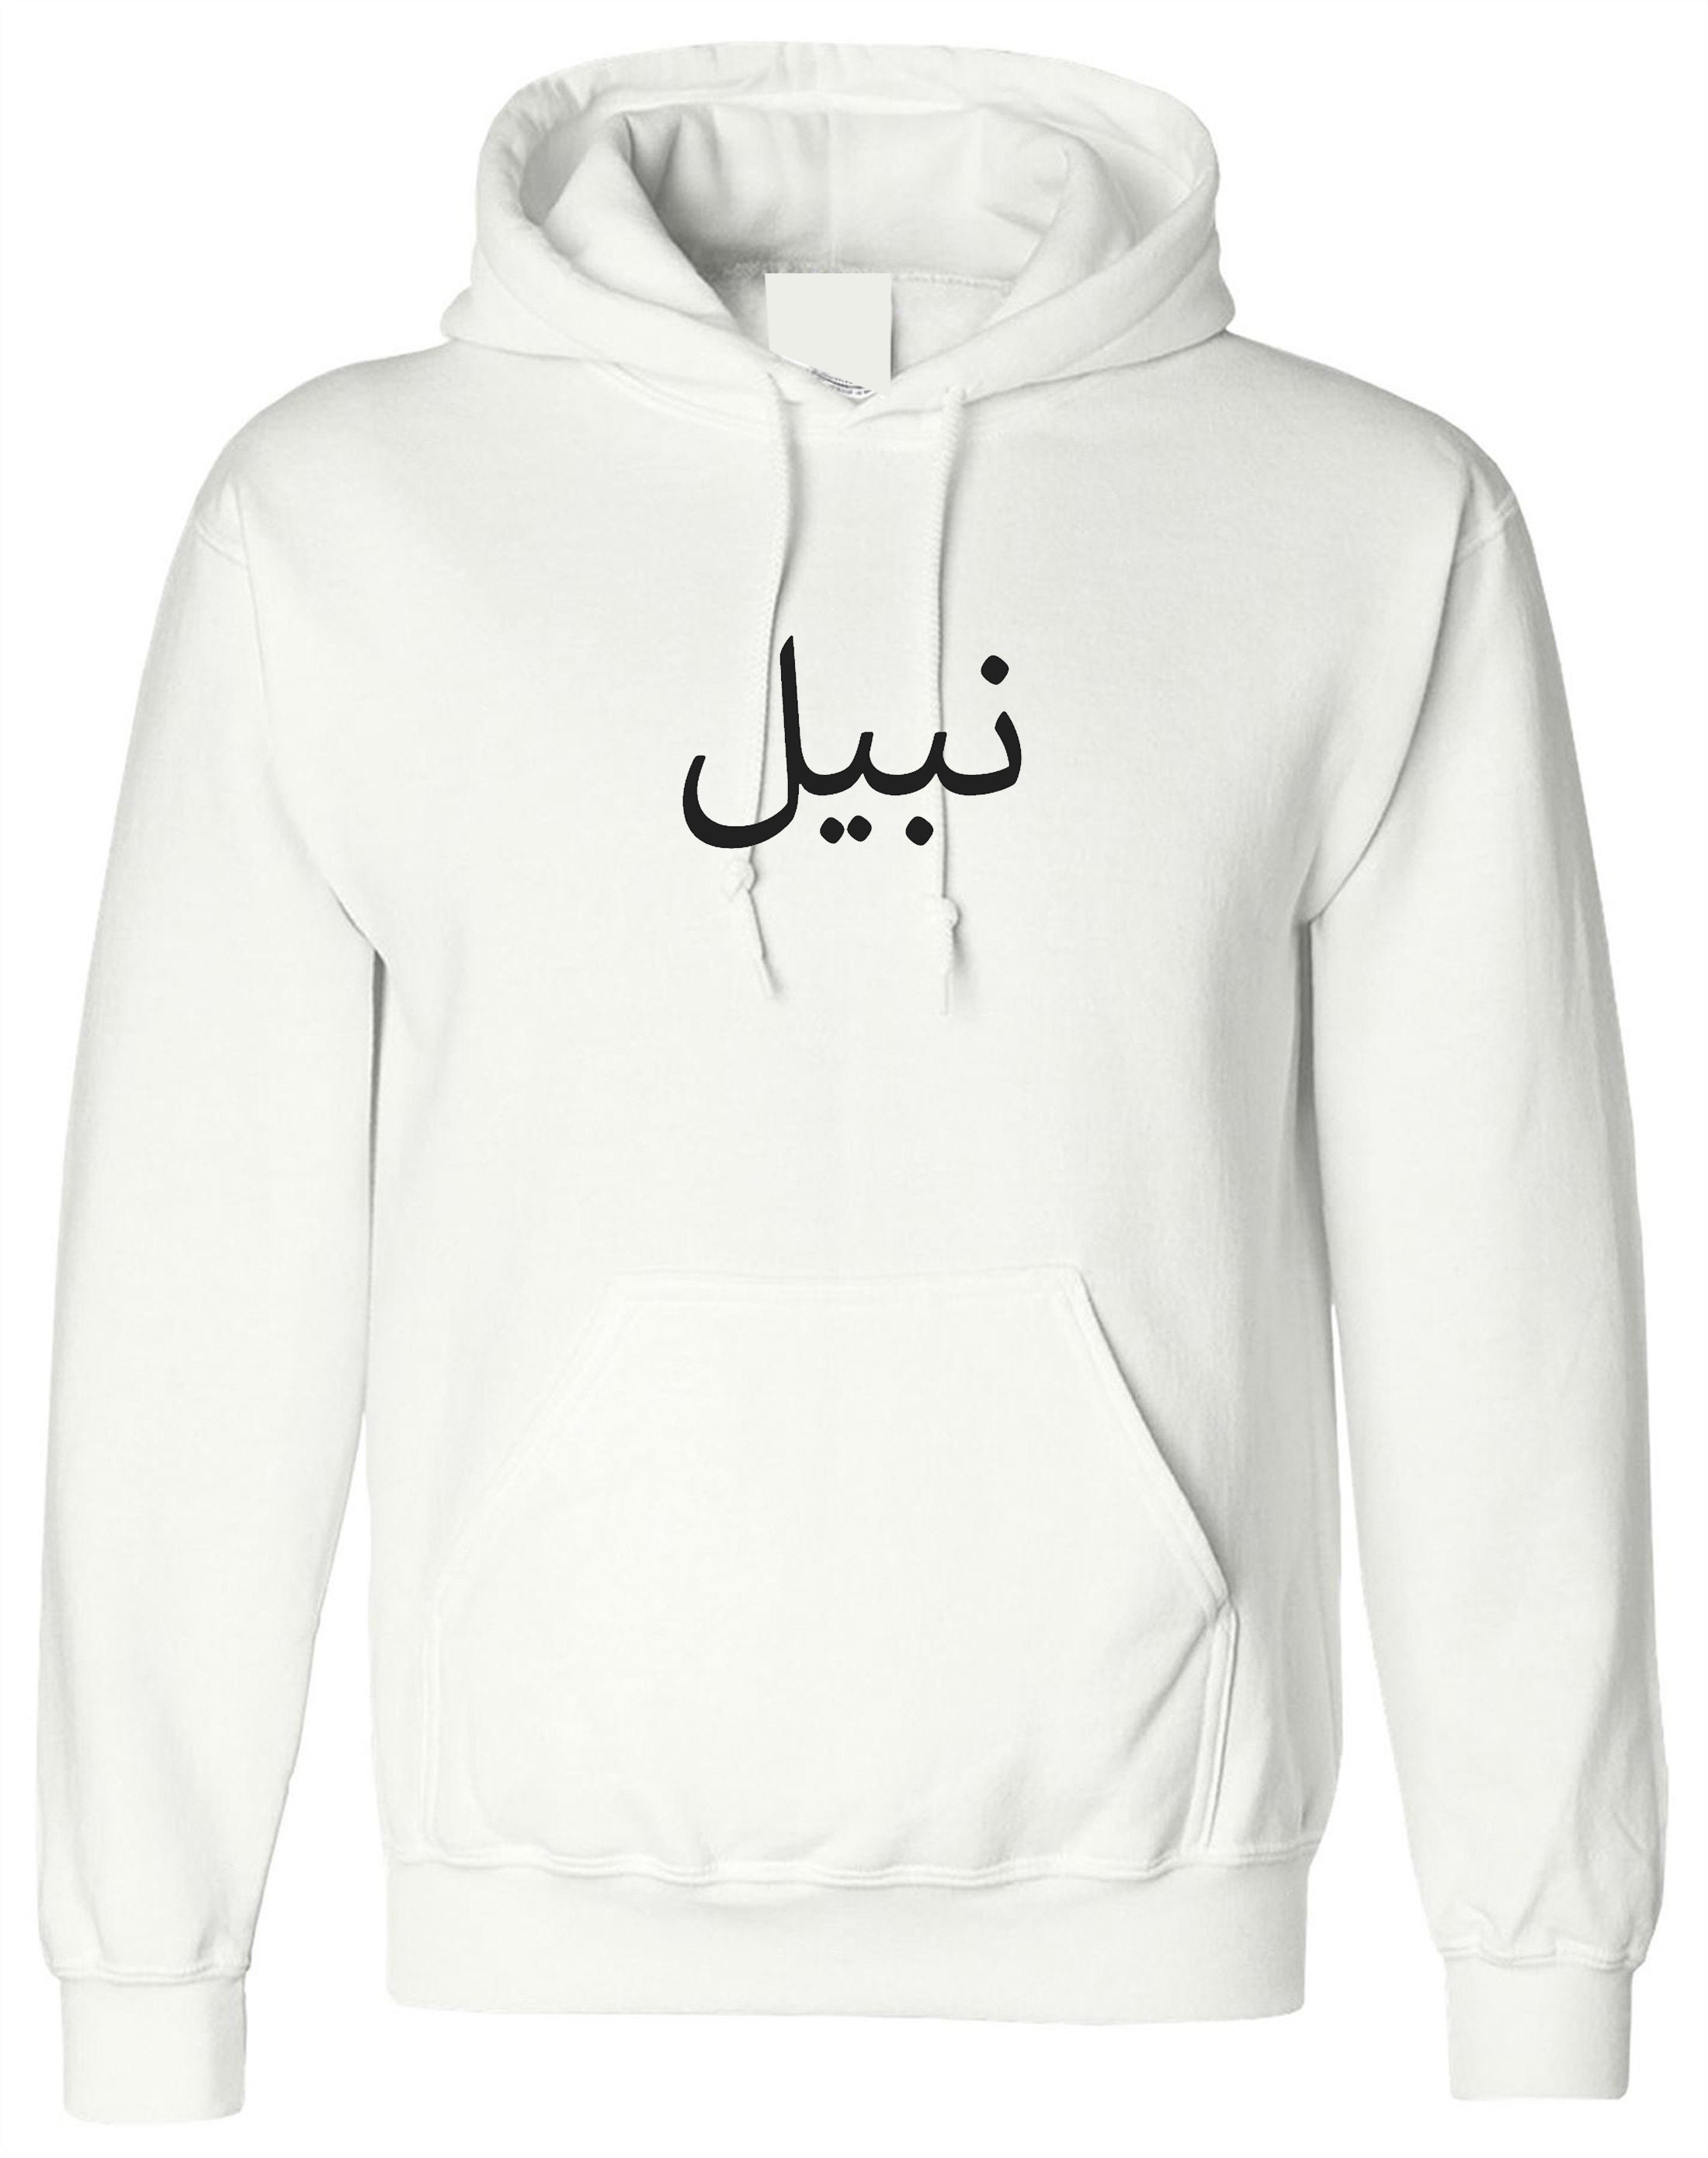 Arabic Names Hoodies Personalized Customized Hoody Your Arabic - Etsy